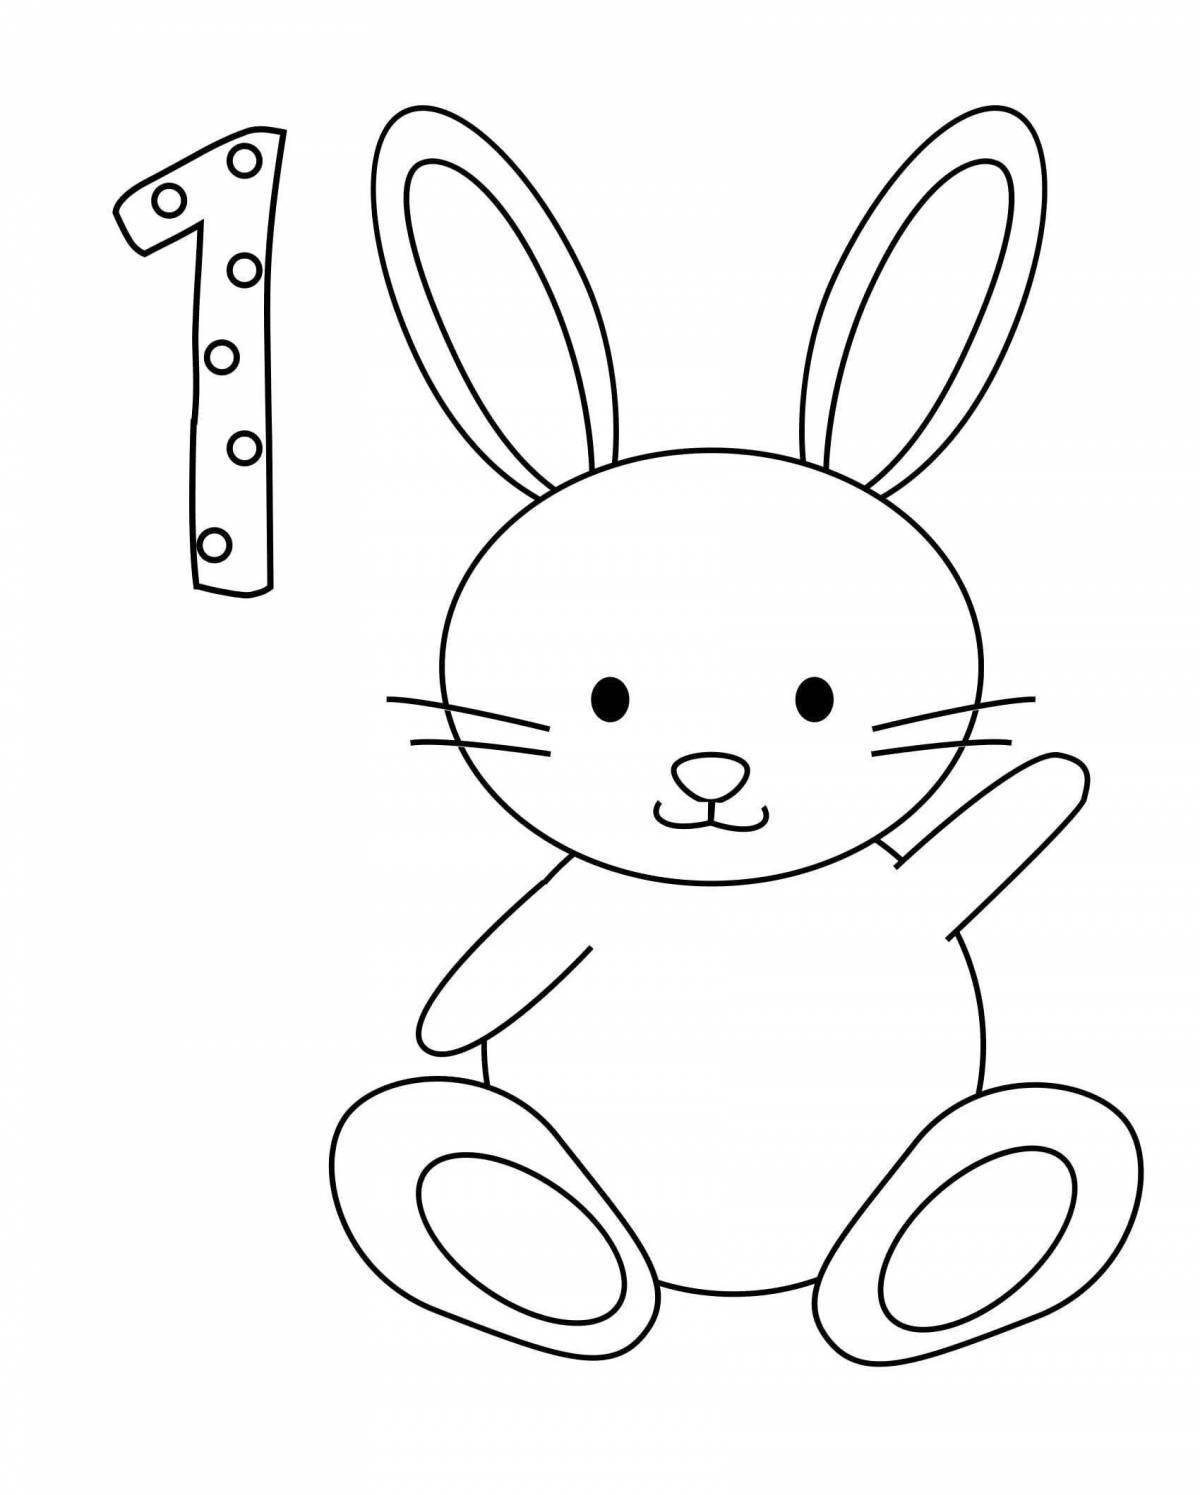 Sweet coloring picture of a hare for kids